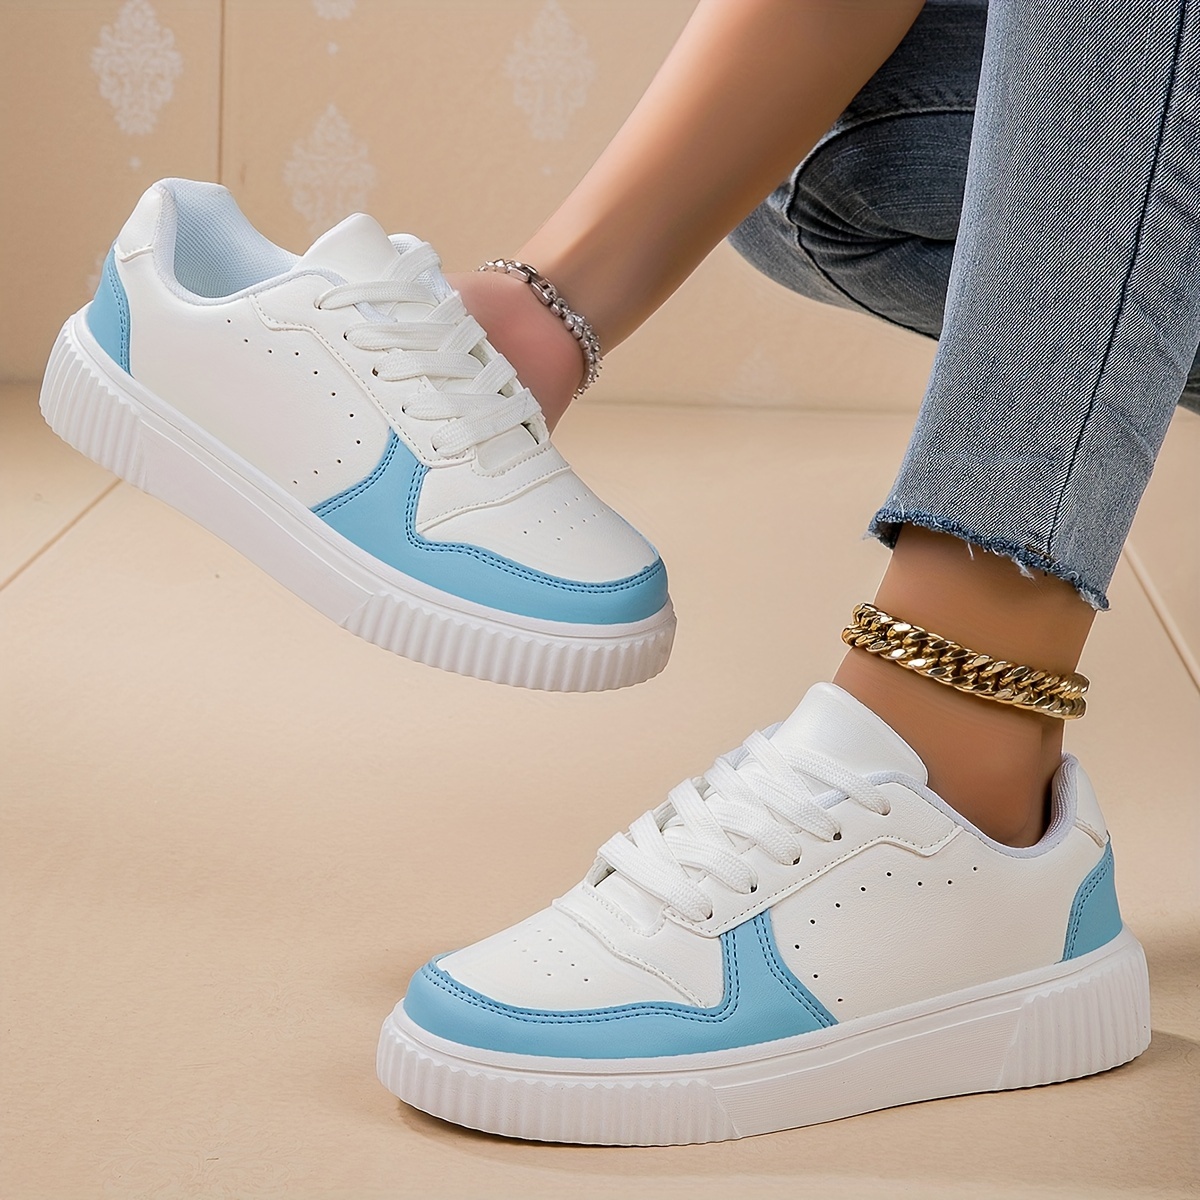 womens solid color sneakers casual lightweight low top skate shoes comfortable white lace up shoes details 7